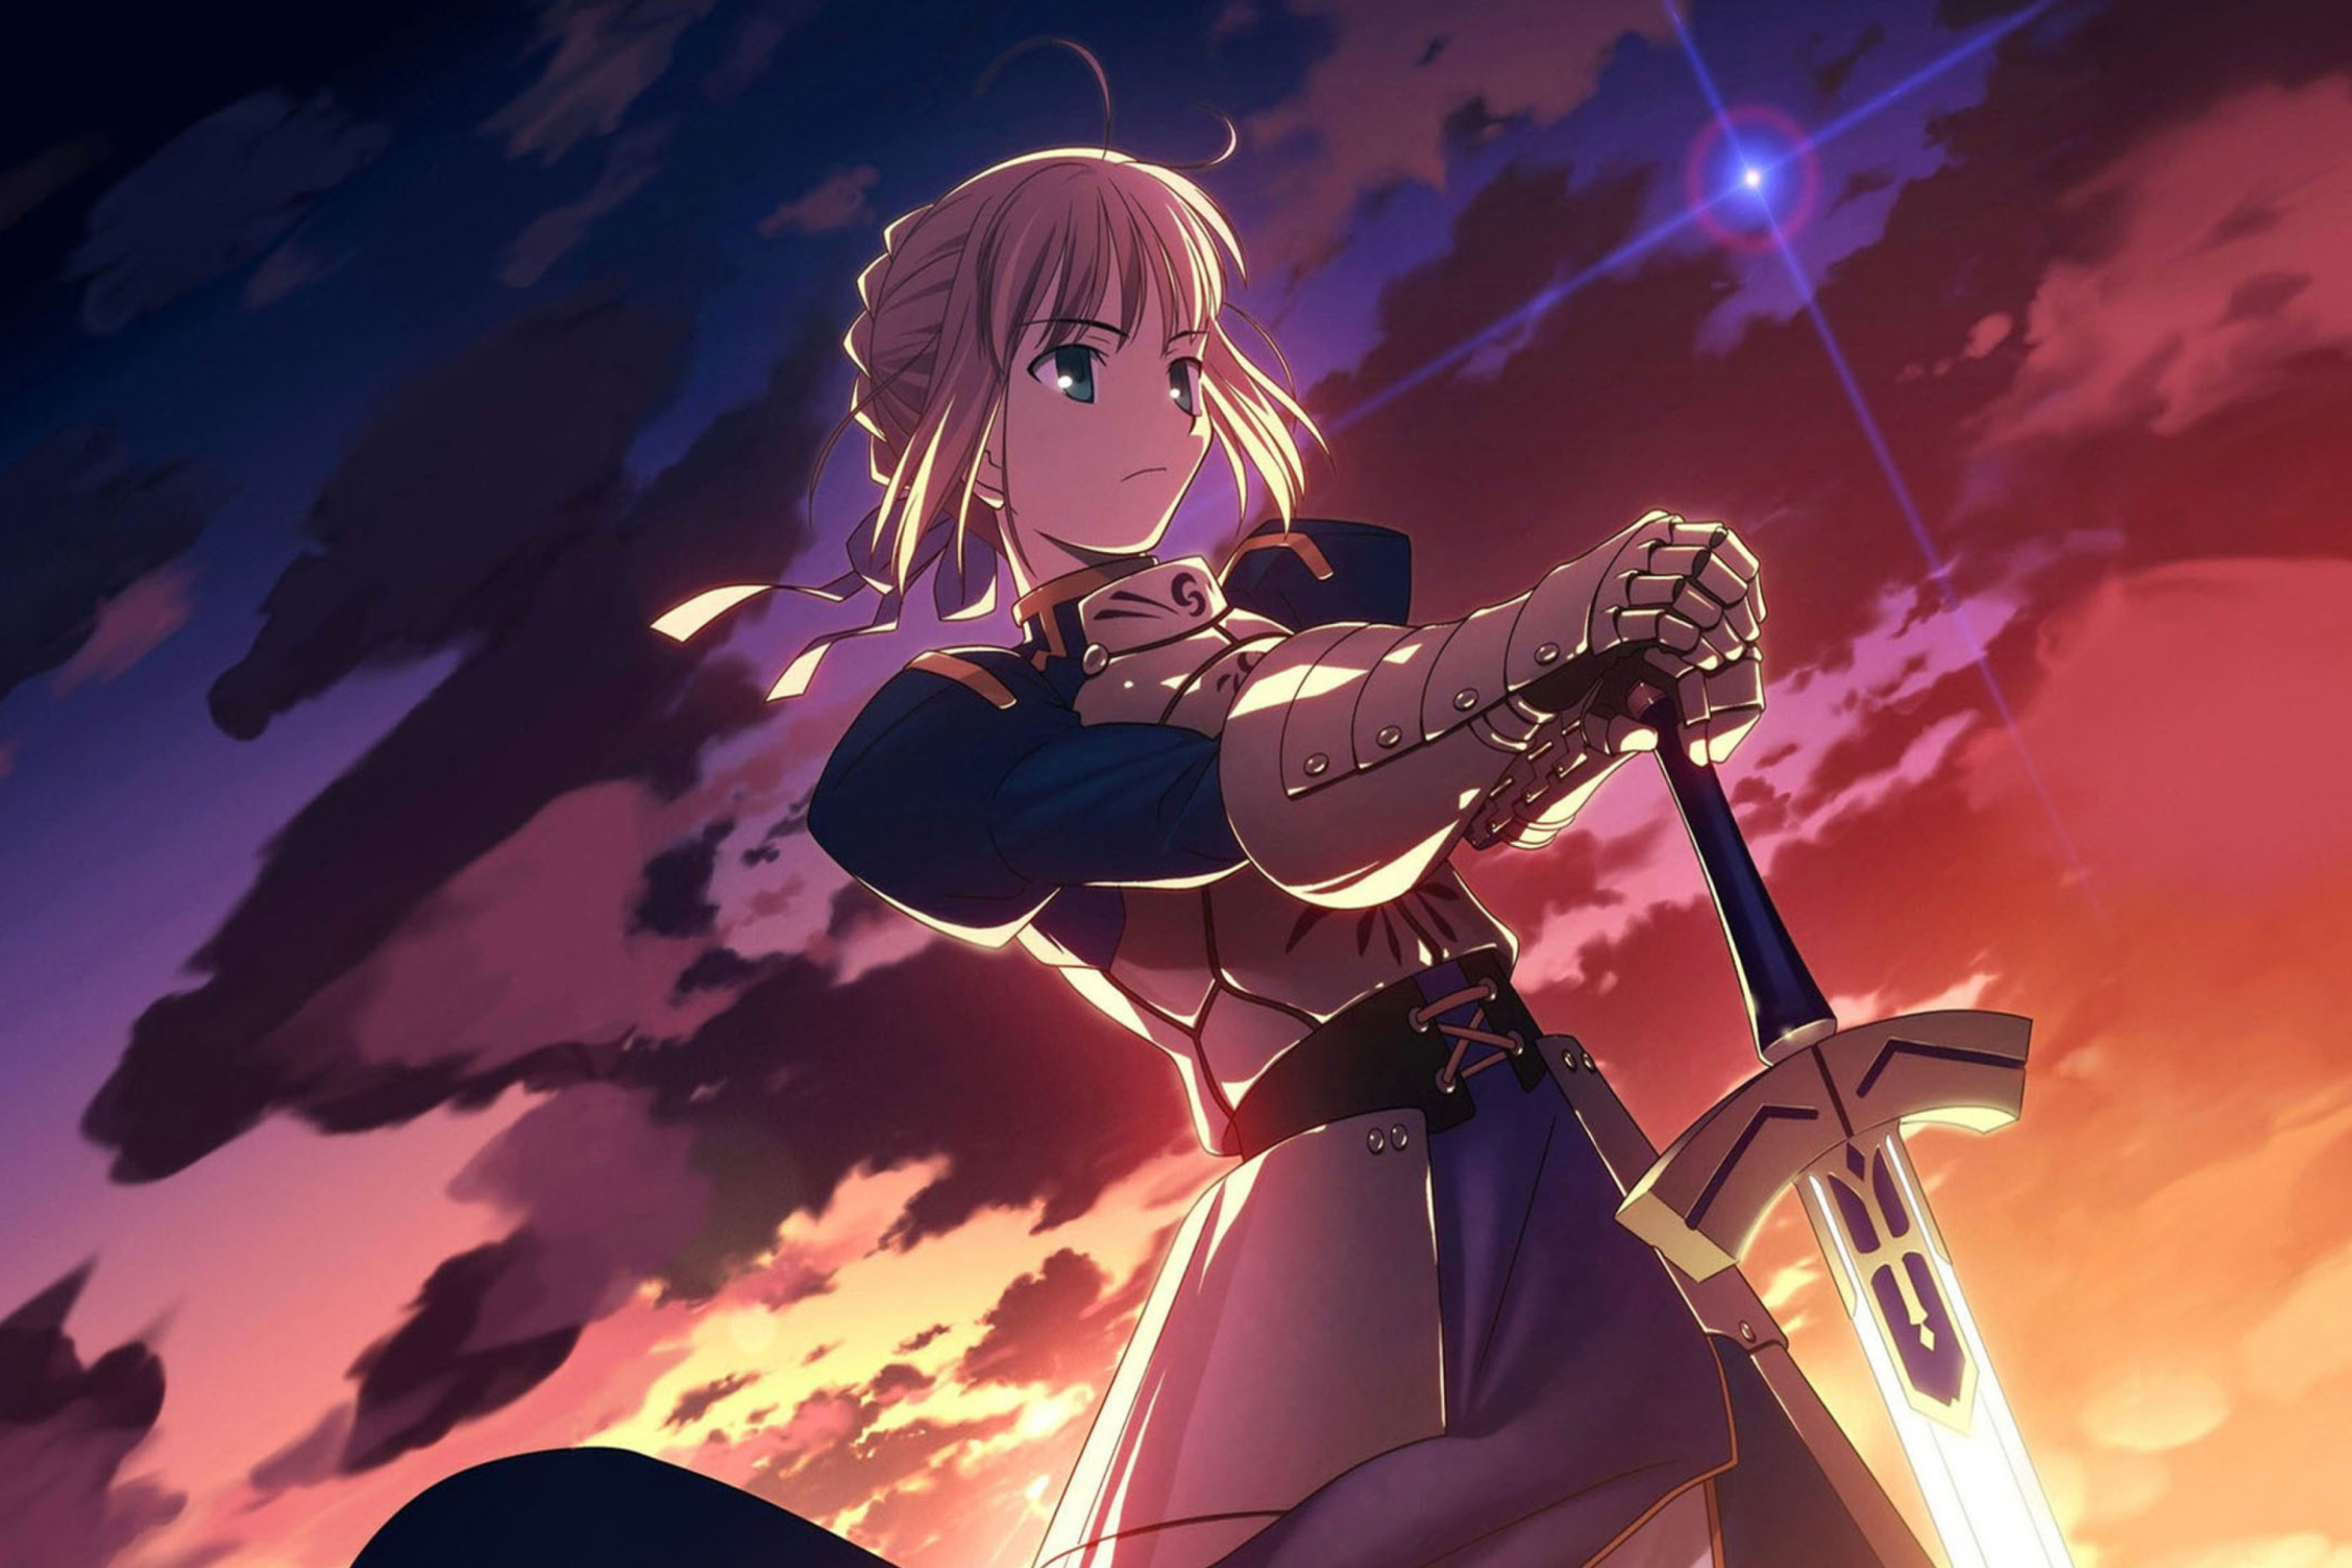 Das Saber from Fate/stay night Wallpaper 2880x1920